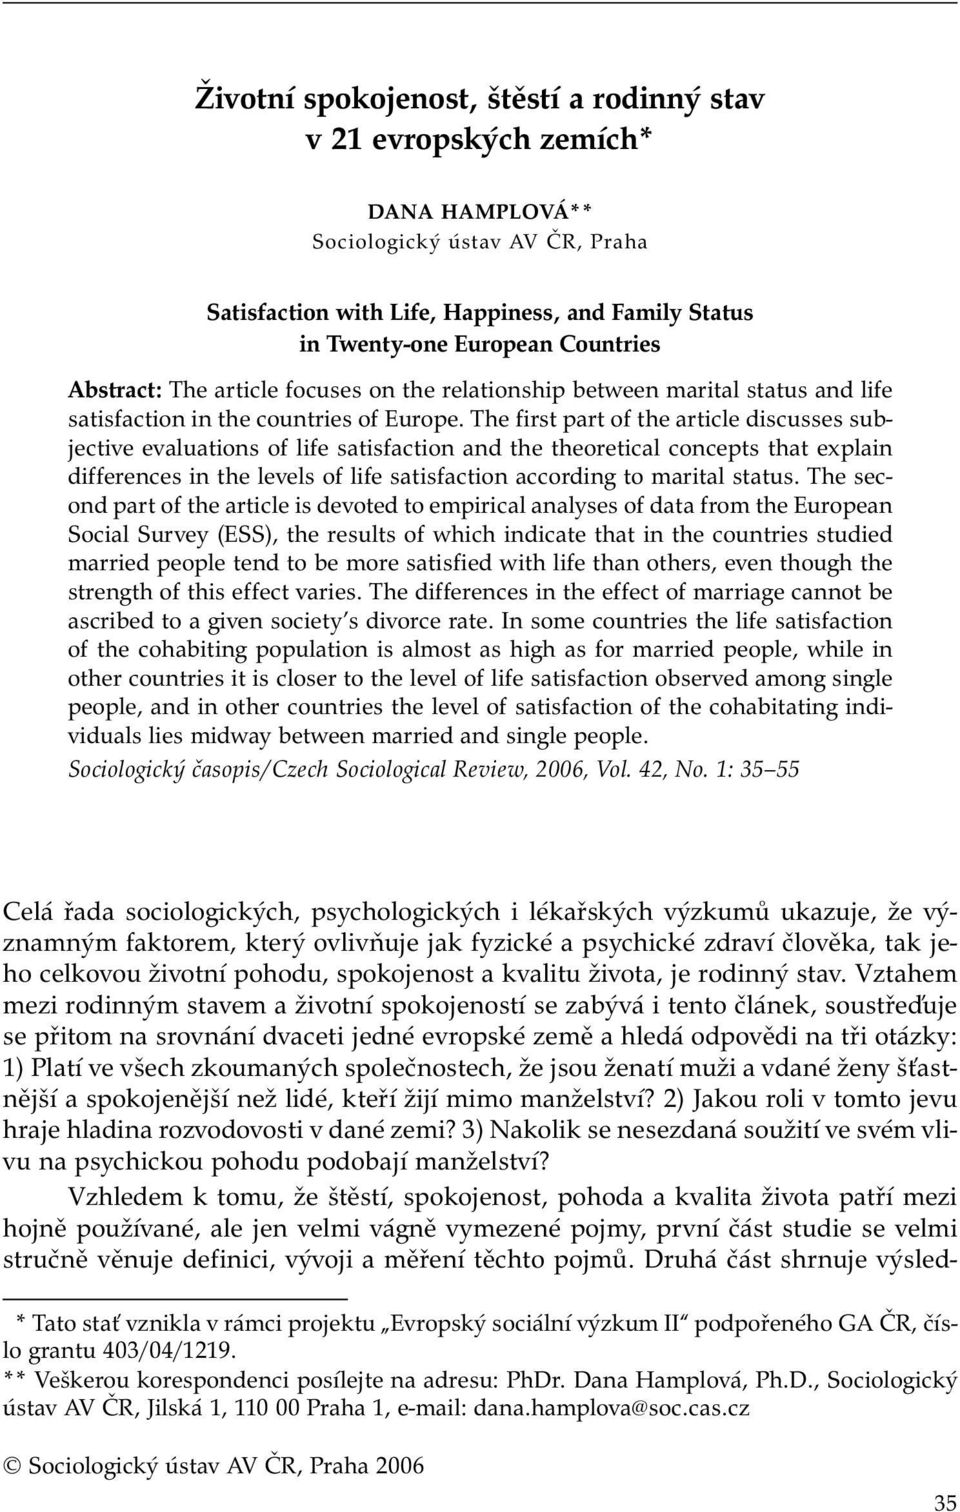 The first part of the article discusses subjective evaluations of life satisfaction and the theoretical concepts that explain differences in the levels of life satisfaction according to marital